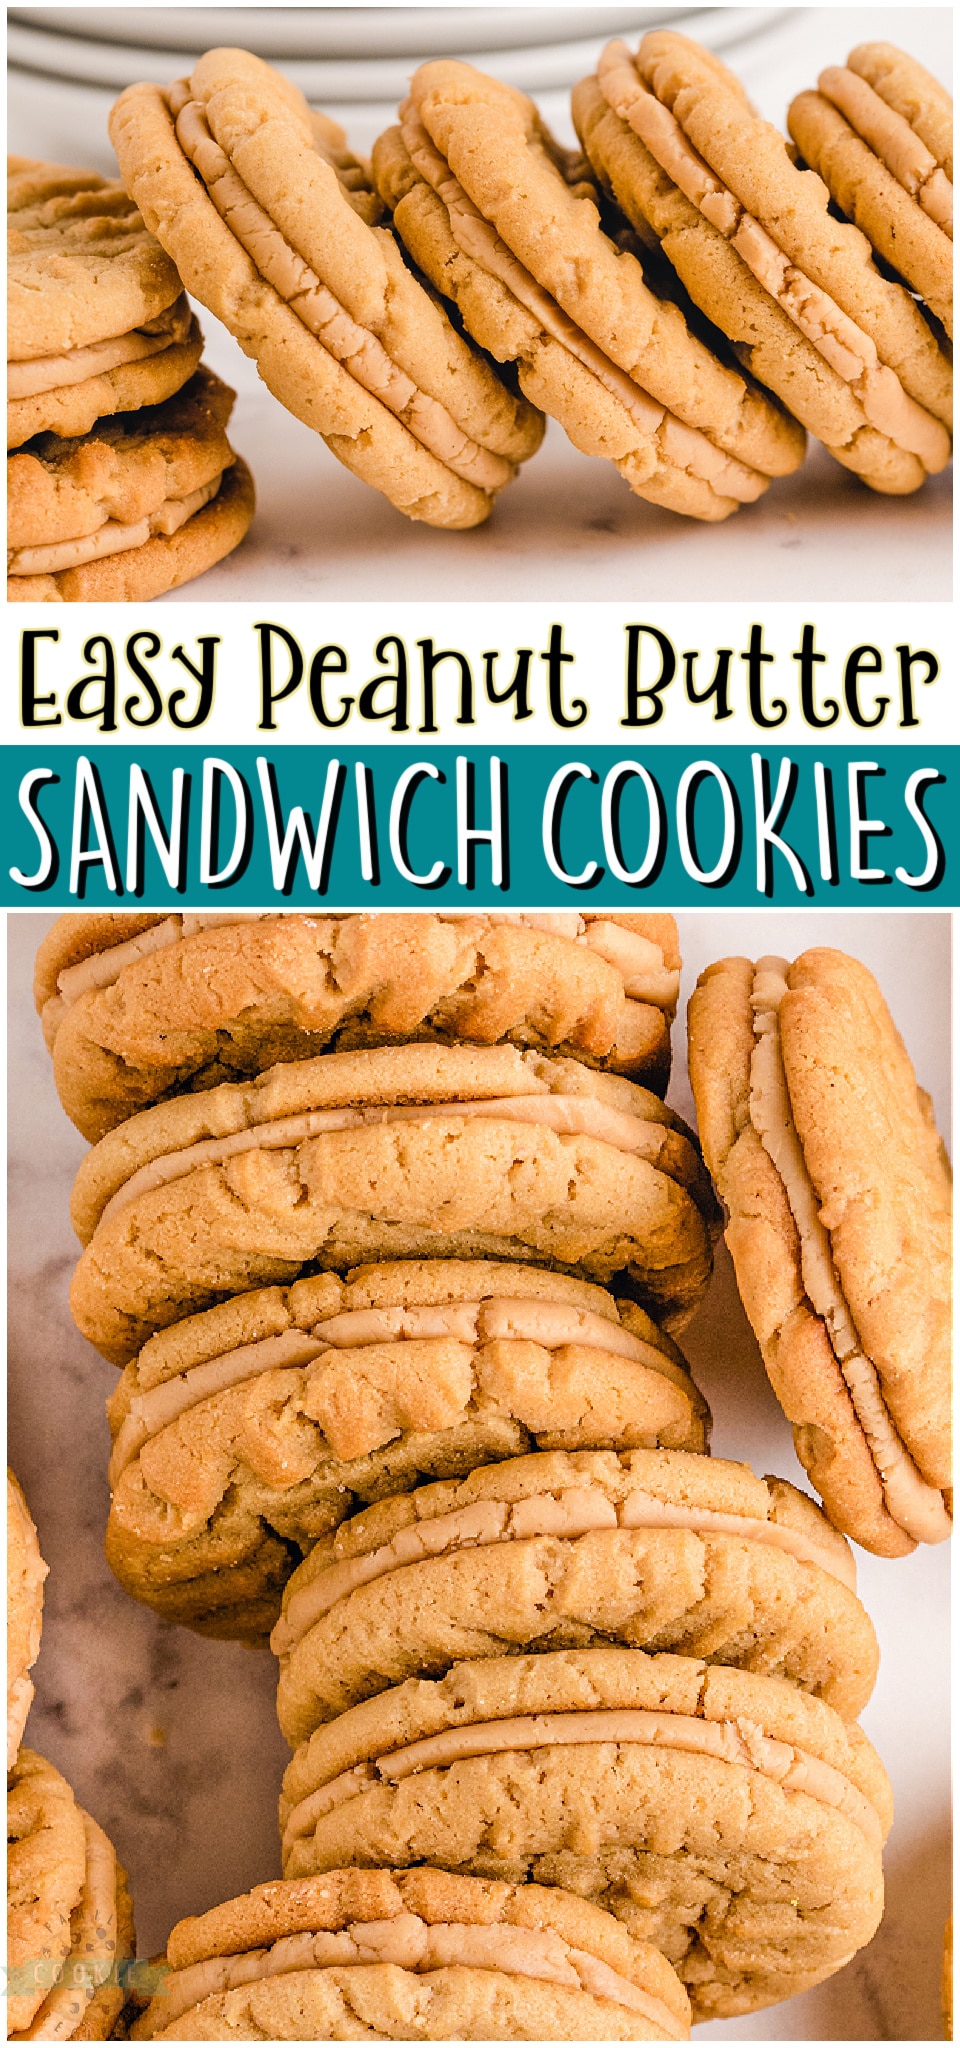 Peanut Butter Sandwich Cookies made with chewy peanut butter cookies & a creamy peanut butter filling. Peanut Butter lovers rejoice! We're sharing our homemade peanut butter cookie sandwiches that everyone goes crazy over!